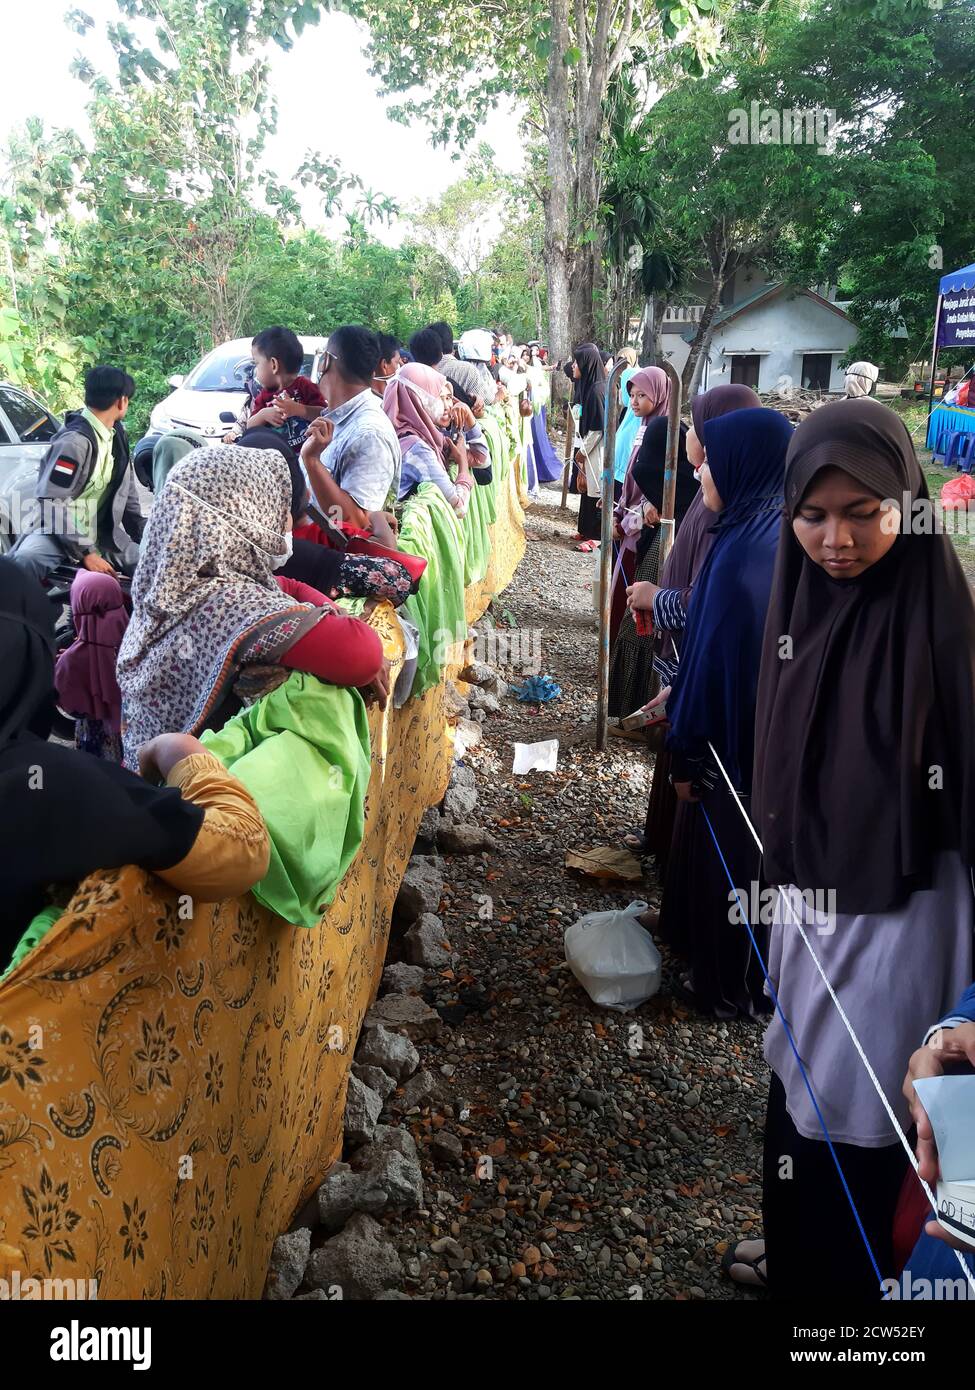 Maintaining a distance during the COVID-19 pandemic, in the atmosphere of a meeting between parents and students at the Oemar Diyan Islamic Boarding School, September 27 in Indrapuri, Aceh Besar, Indonesia. Stock Photo